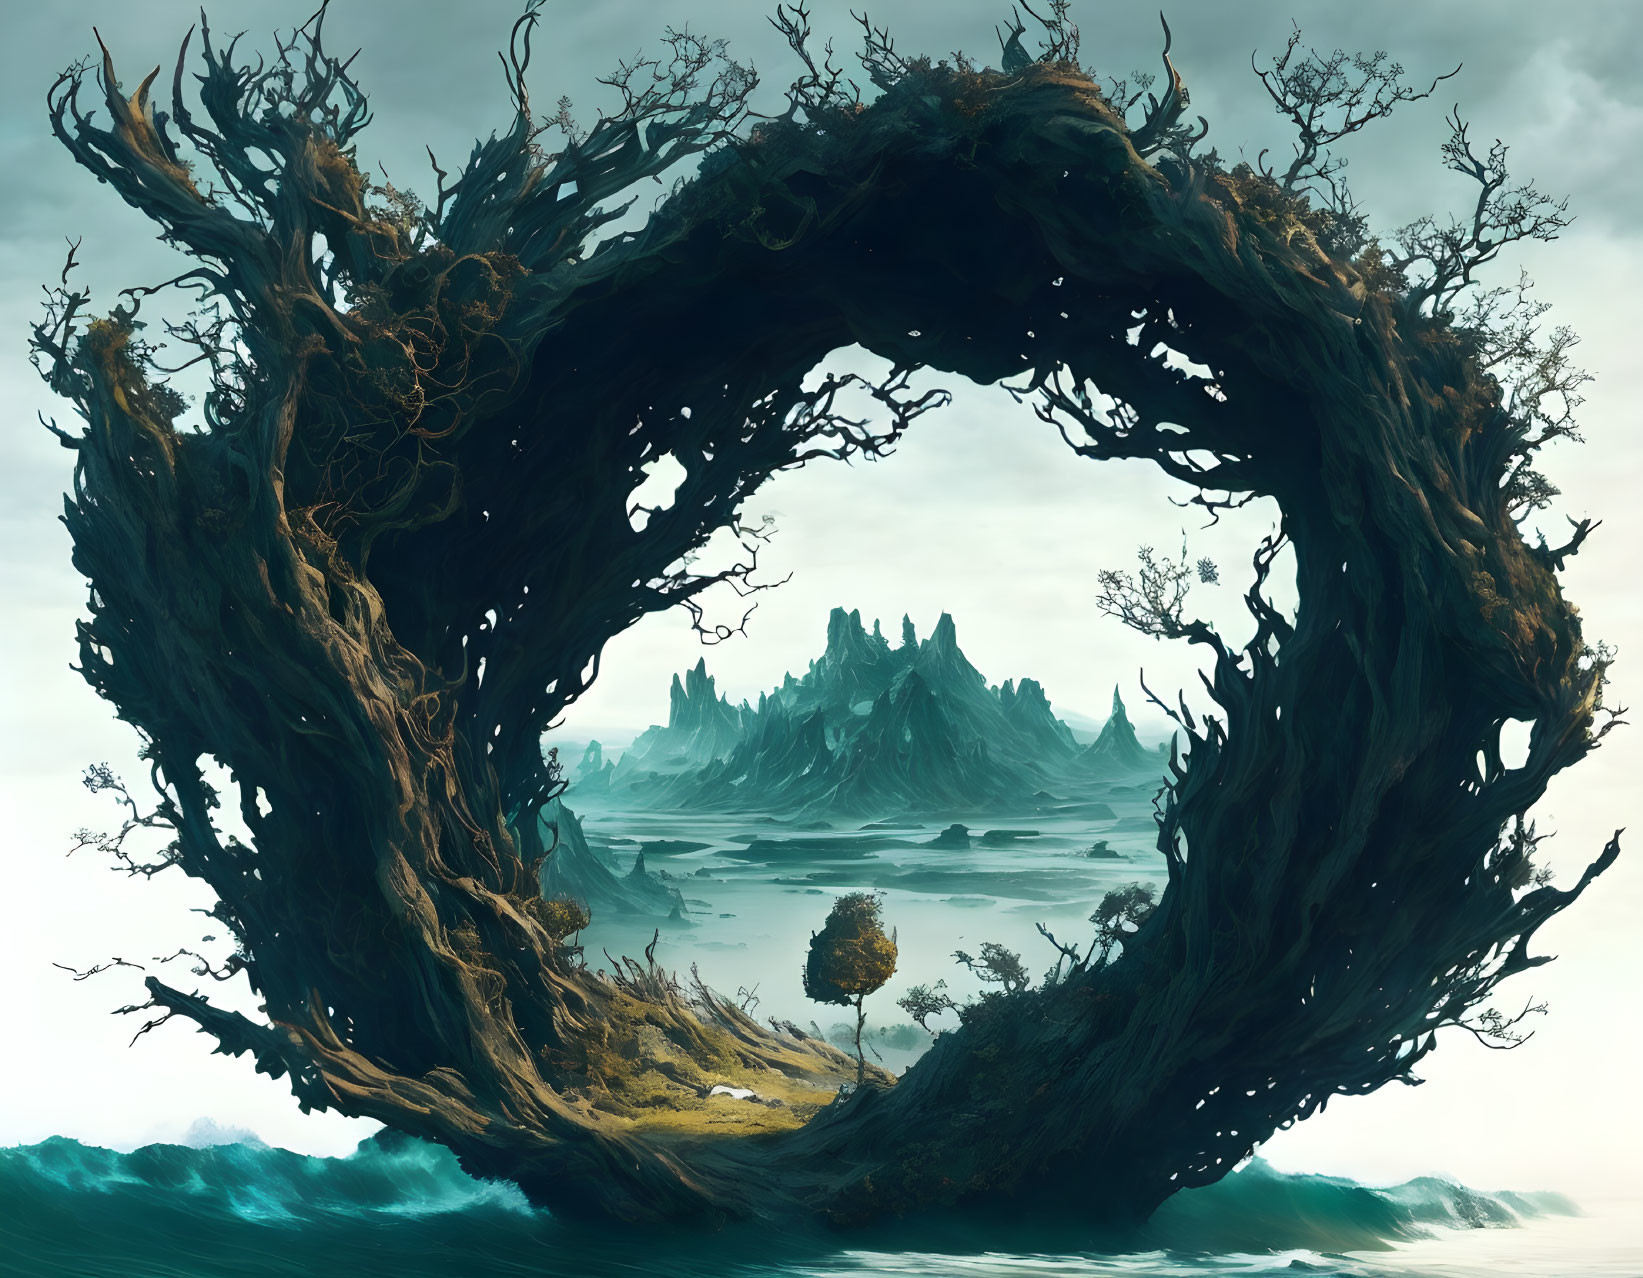 Surreal landscape with twisted trees, tranquil sea, mountains, clear sky